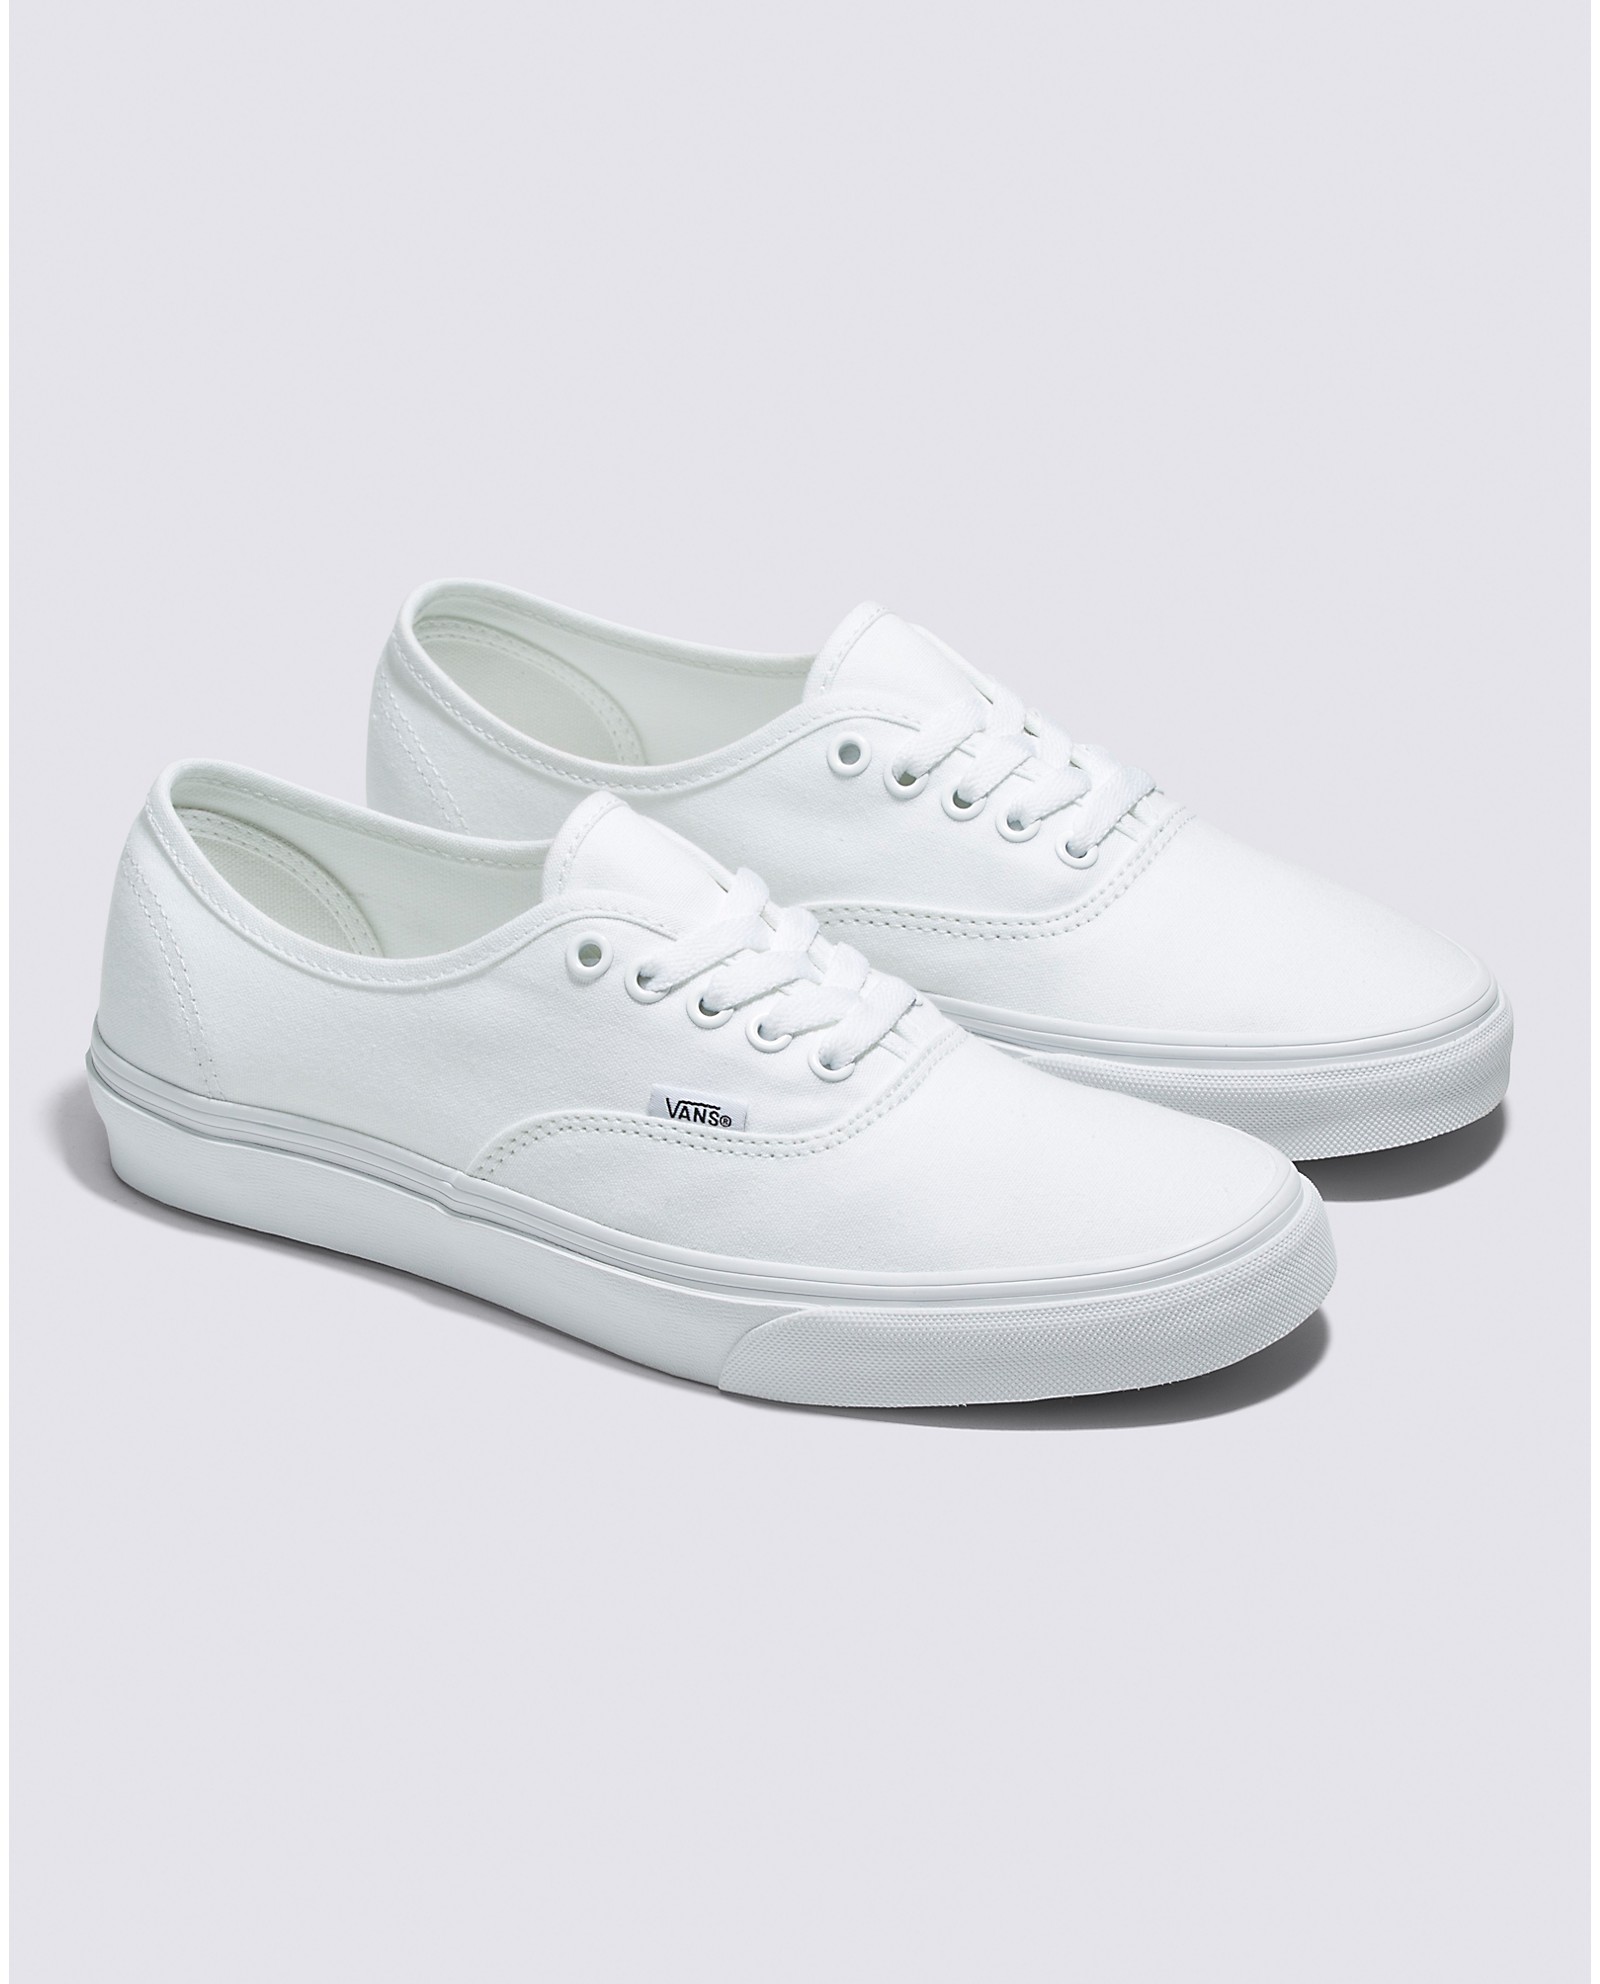 Vans all white shoes